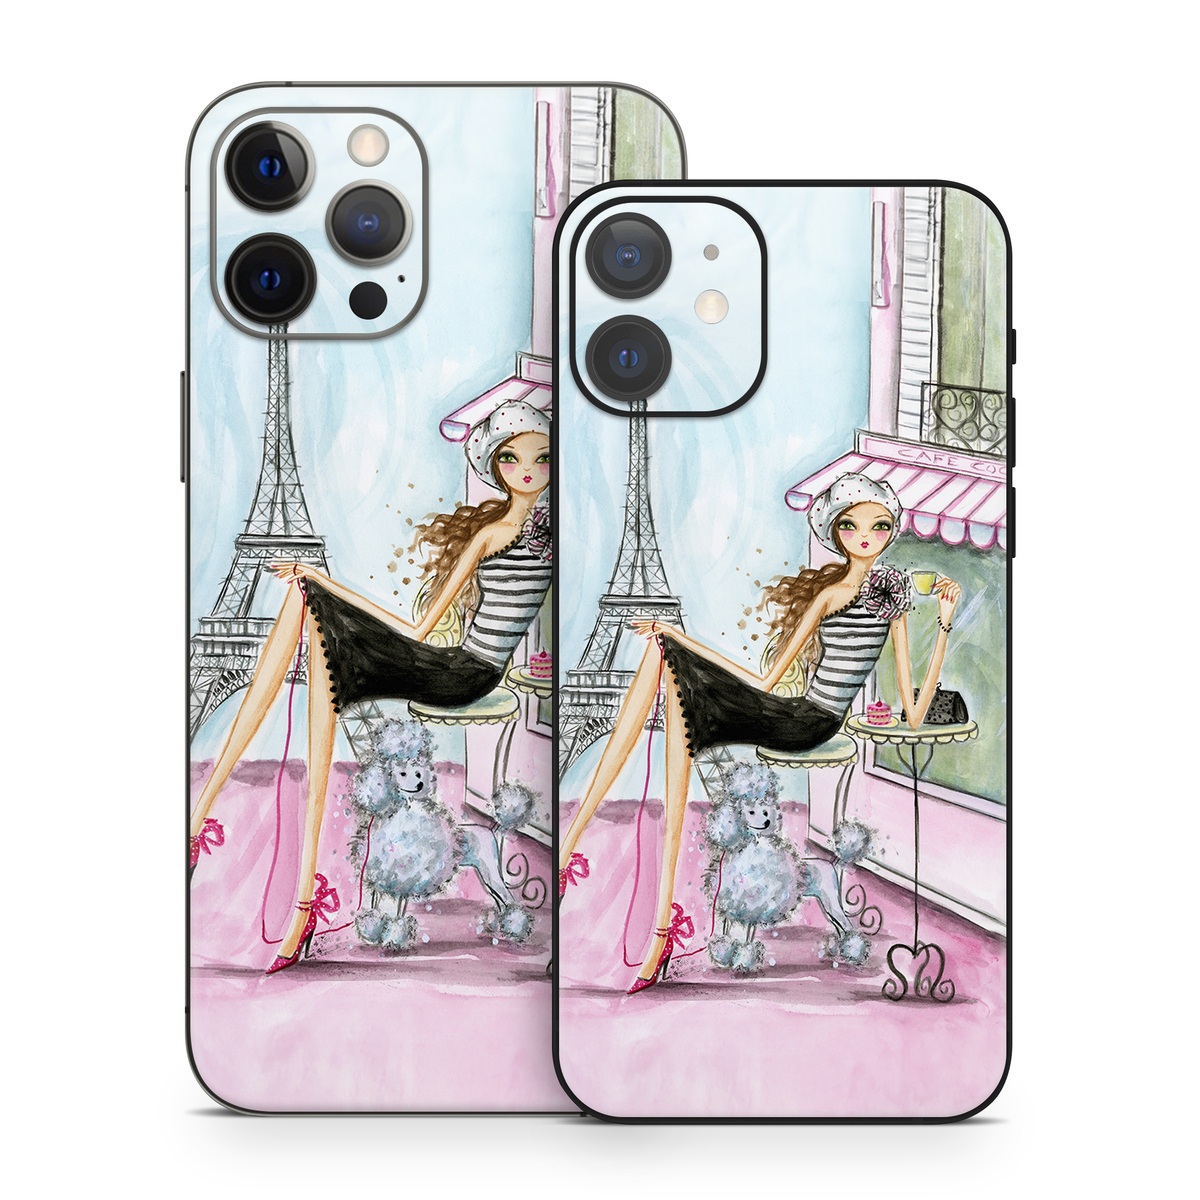 iPhone 12 Skin design of Pink, Illustration, Sitting, Konghou, Watercolor paint, Fashion illustration, Art, Drawing, Style, with gray, purple, blue, black, pink colors